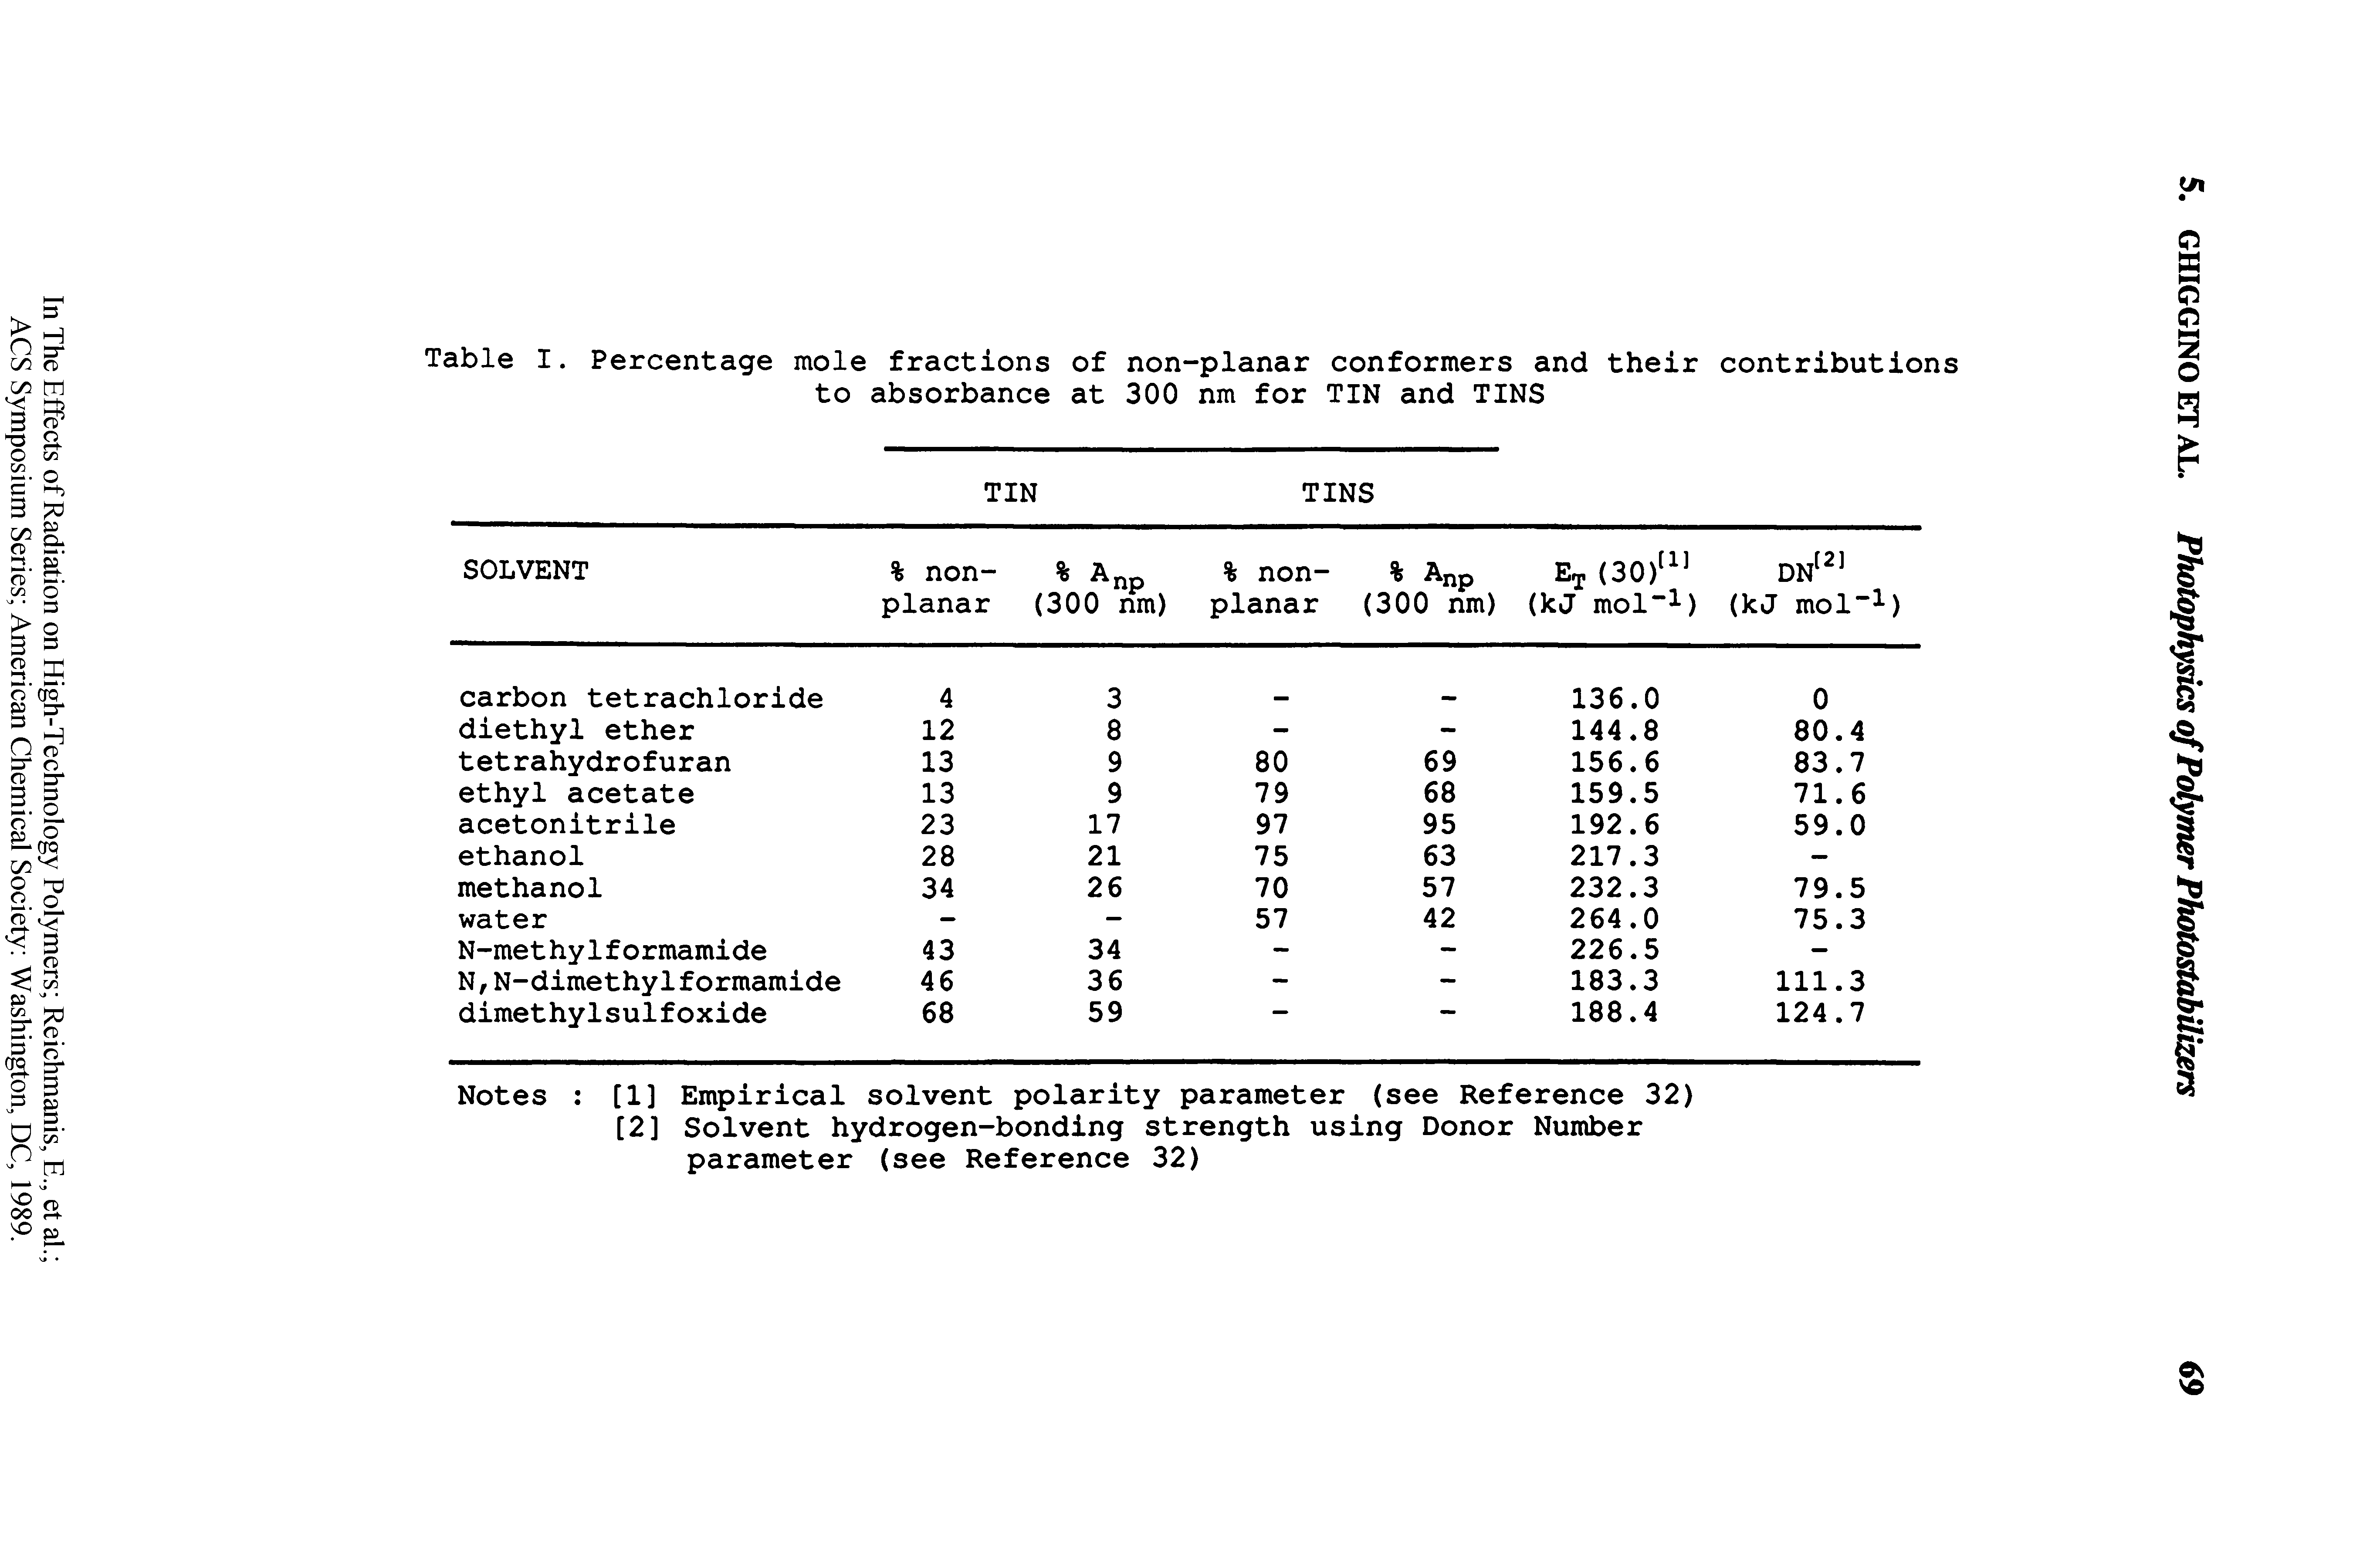 Table I. Percentage mole fractions of non-planar conformers and their contributions to absorbance at 300 nm for TIN and TINS...